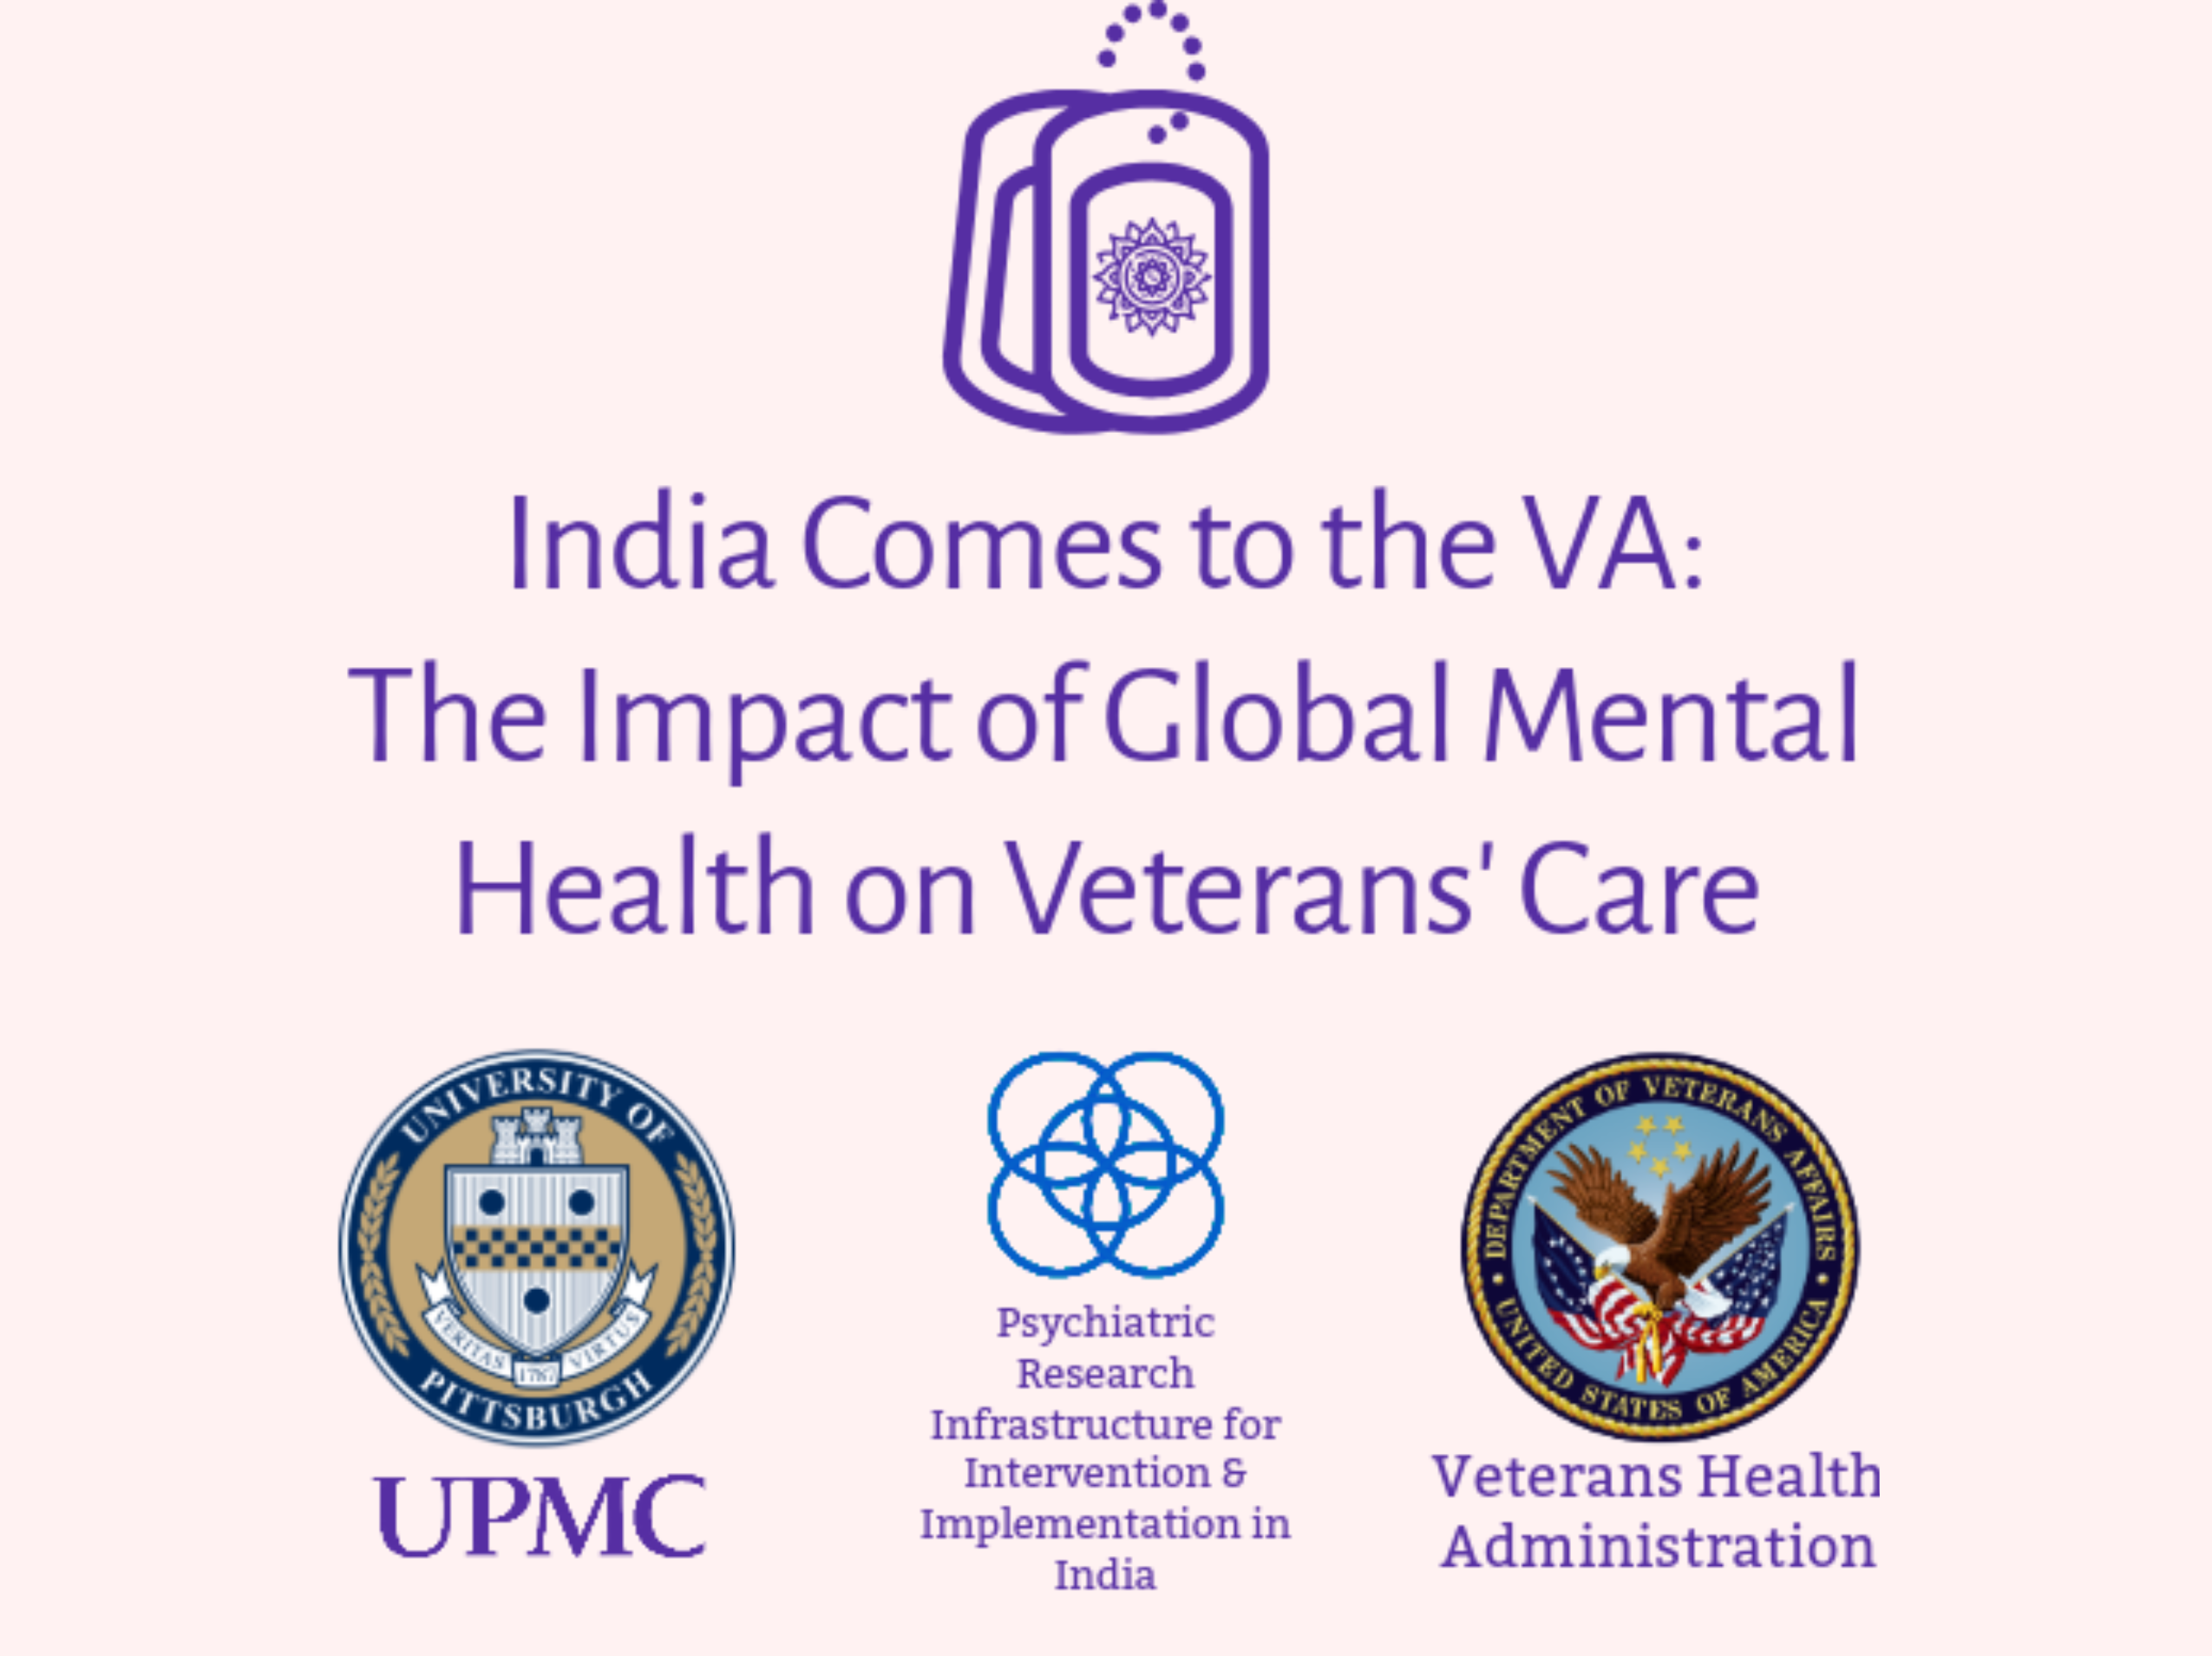 India Come to the VA Pittsburgh